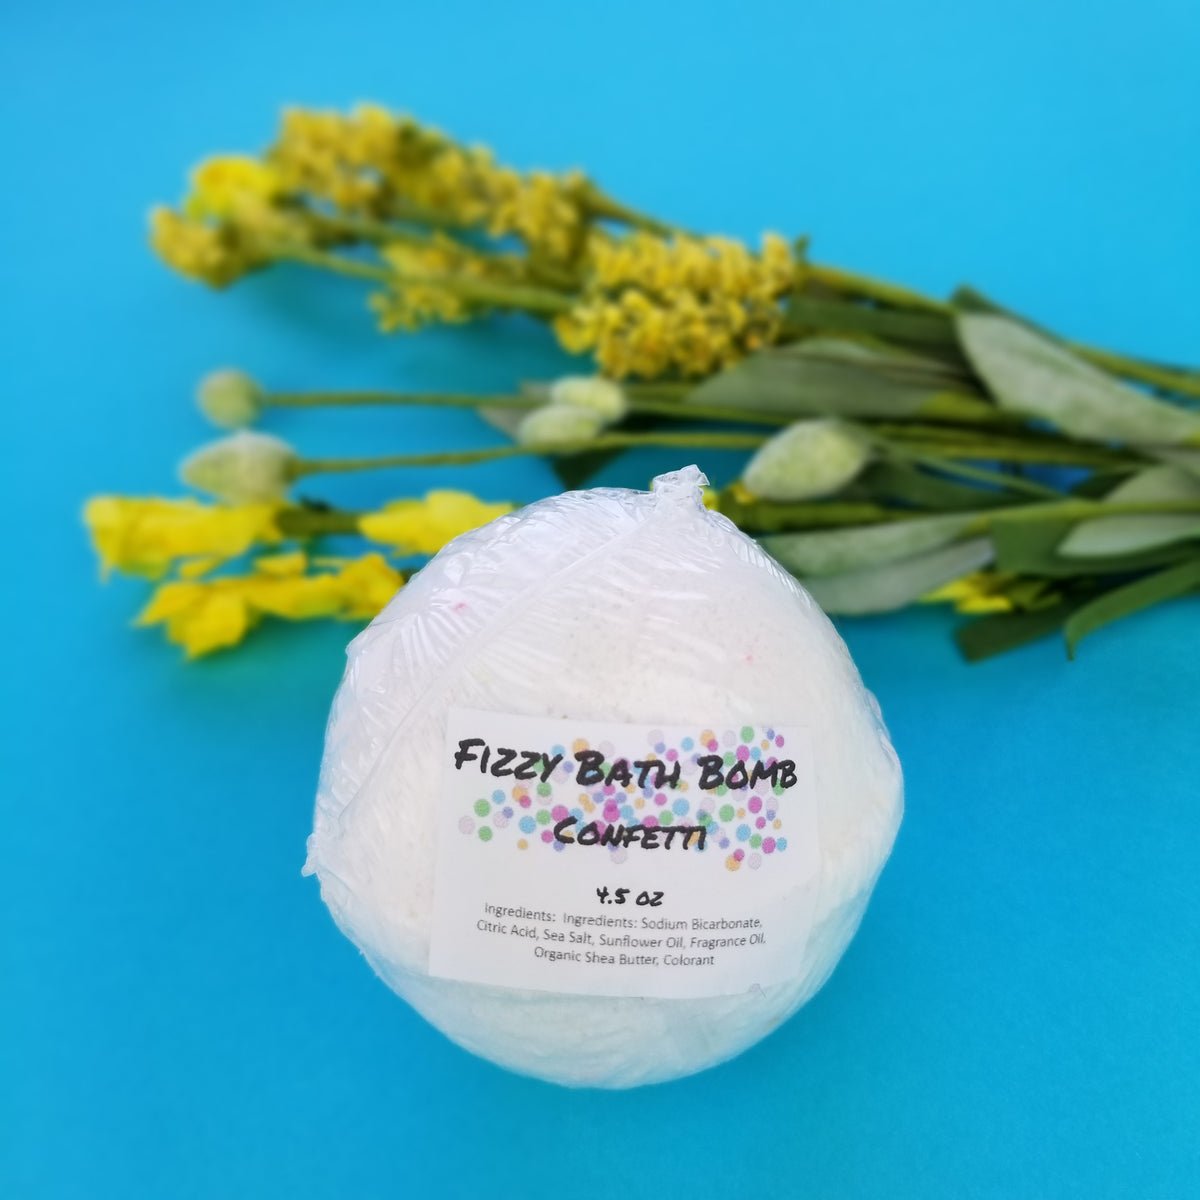 Fizzy Bath Bomb with added Confetti! 4.5 OZ with ingredients: Sodium Bicarbonate, Citric Acid, Sea Salt, Sunflower Oil, Fragrance Oil, Organic Shea Butter, Colorant